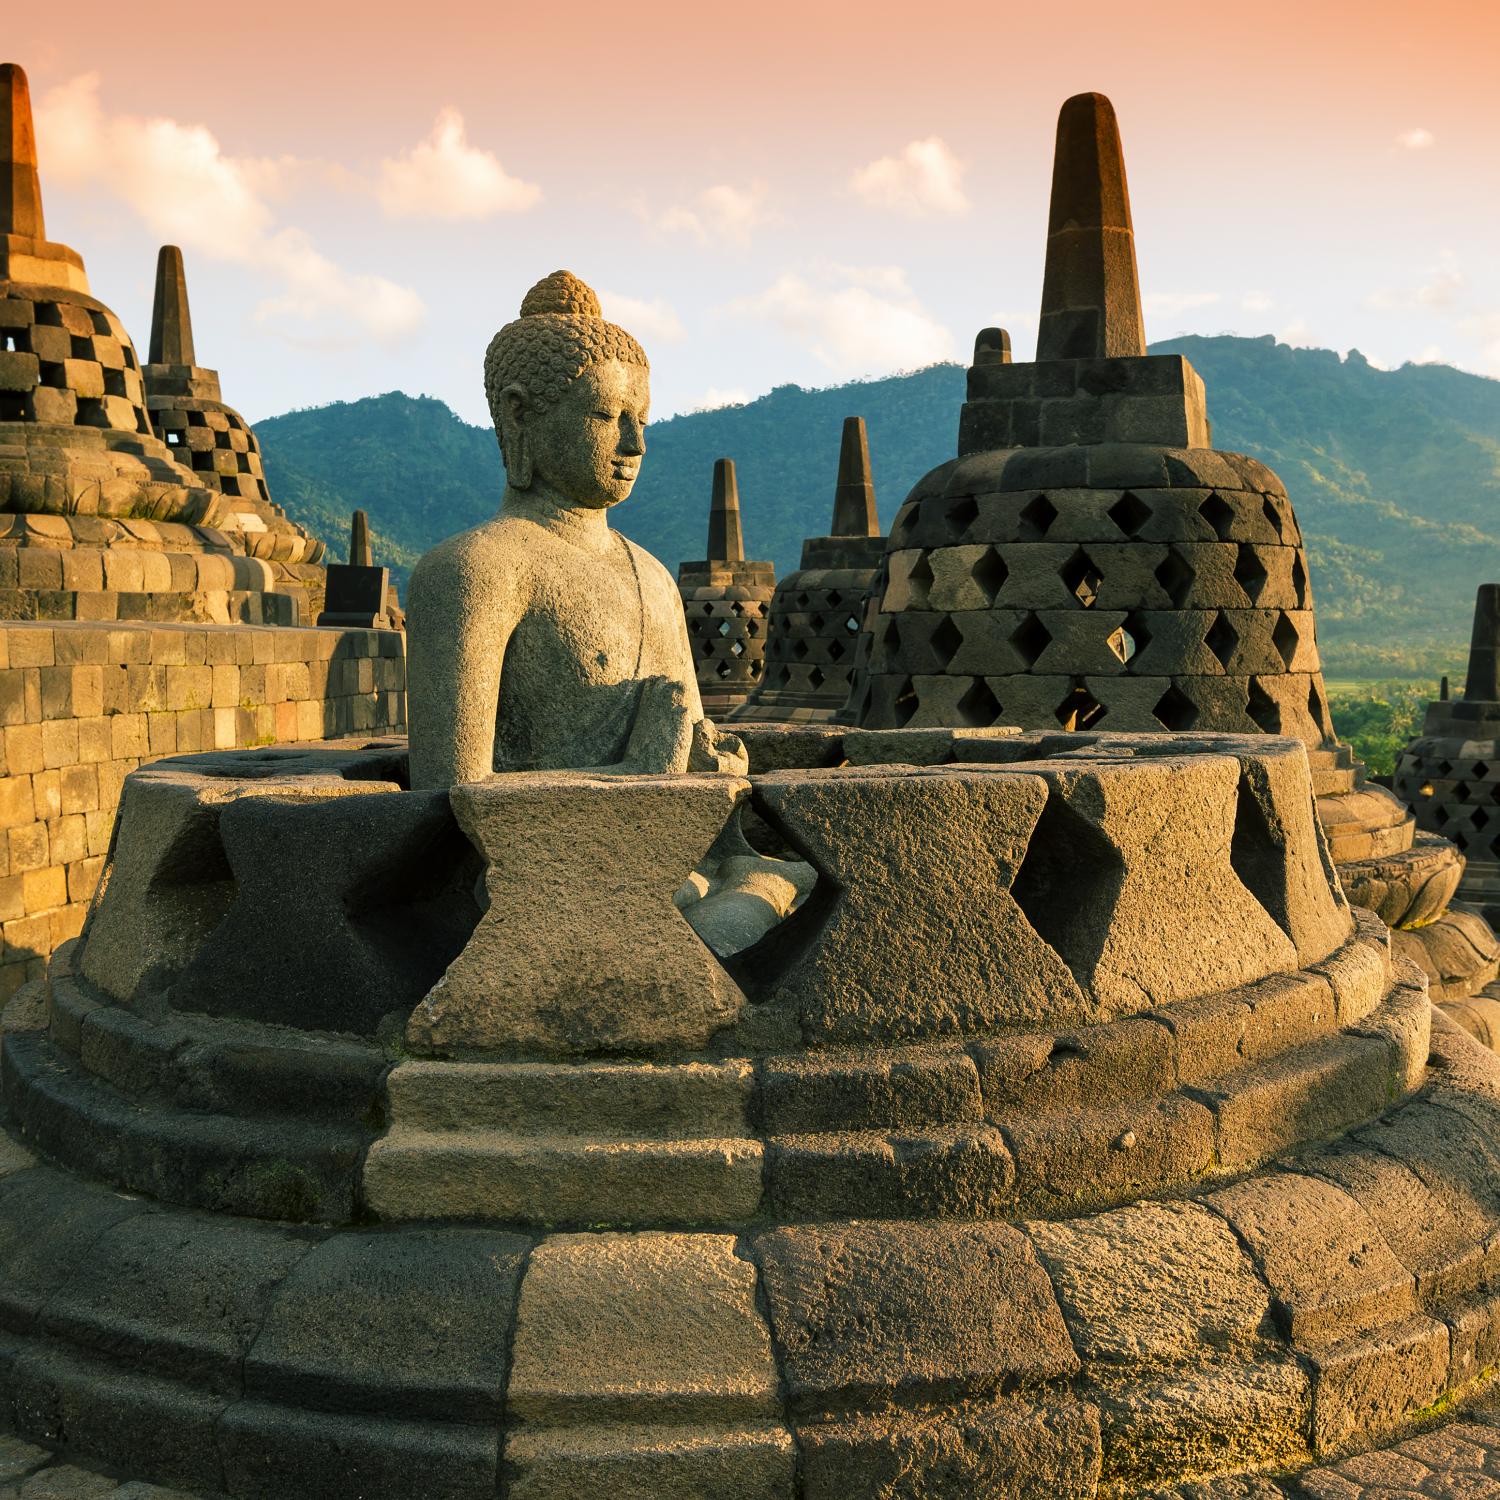 Exotic Indonesia. Tailor-made tours and travel itineraries in Indonesia.